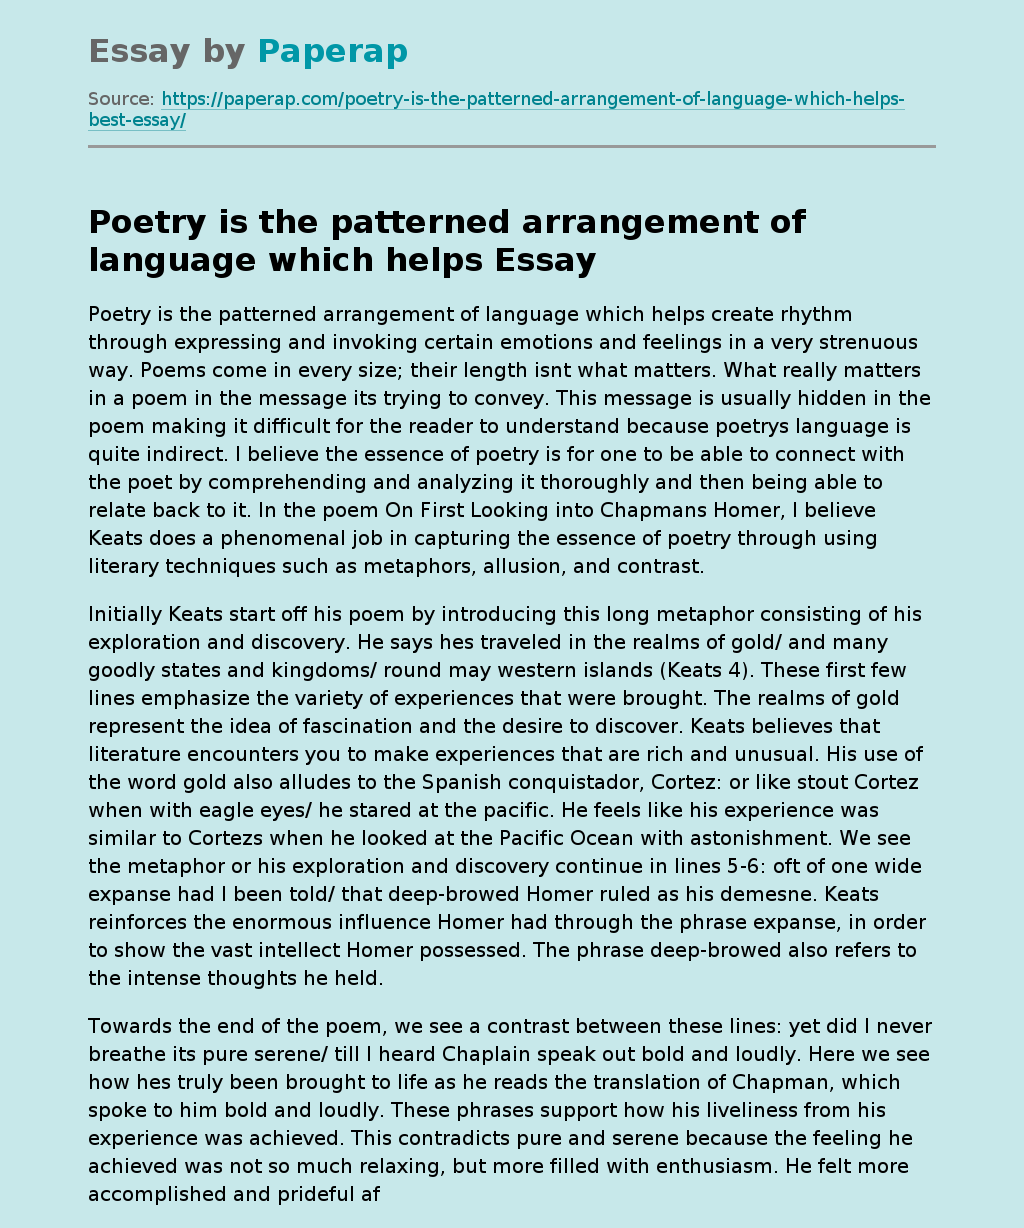 Poetry Is the Patterned Arrangement of Language Which Helps